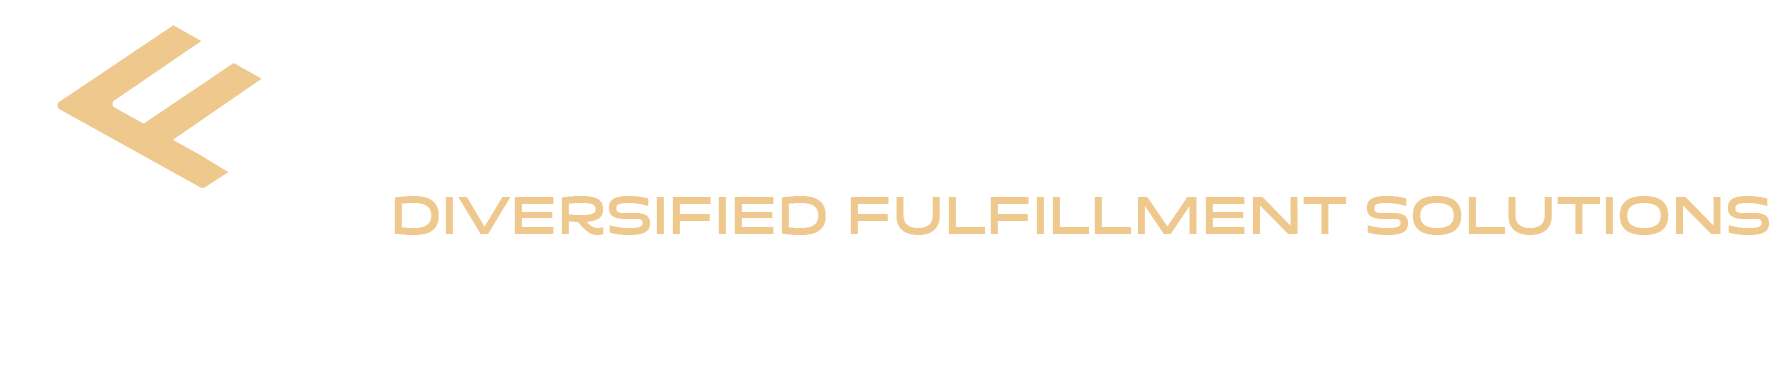 Diversified Fulfillment Solutions